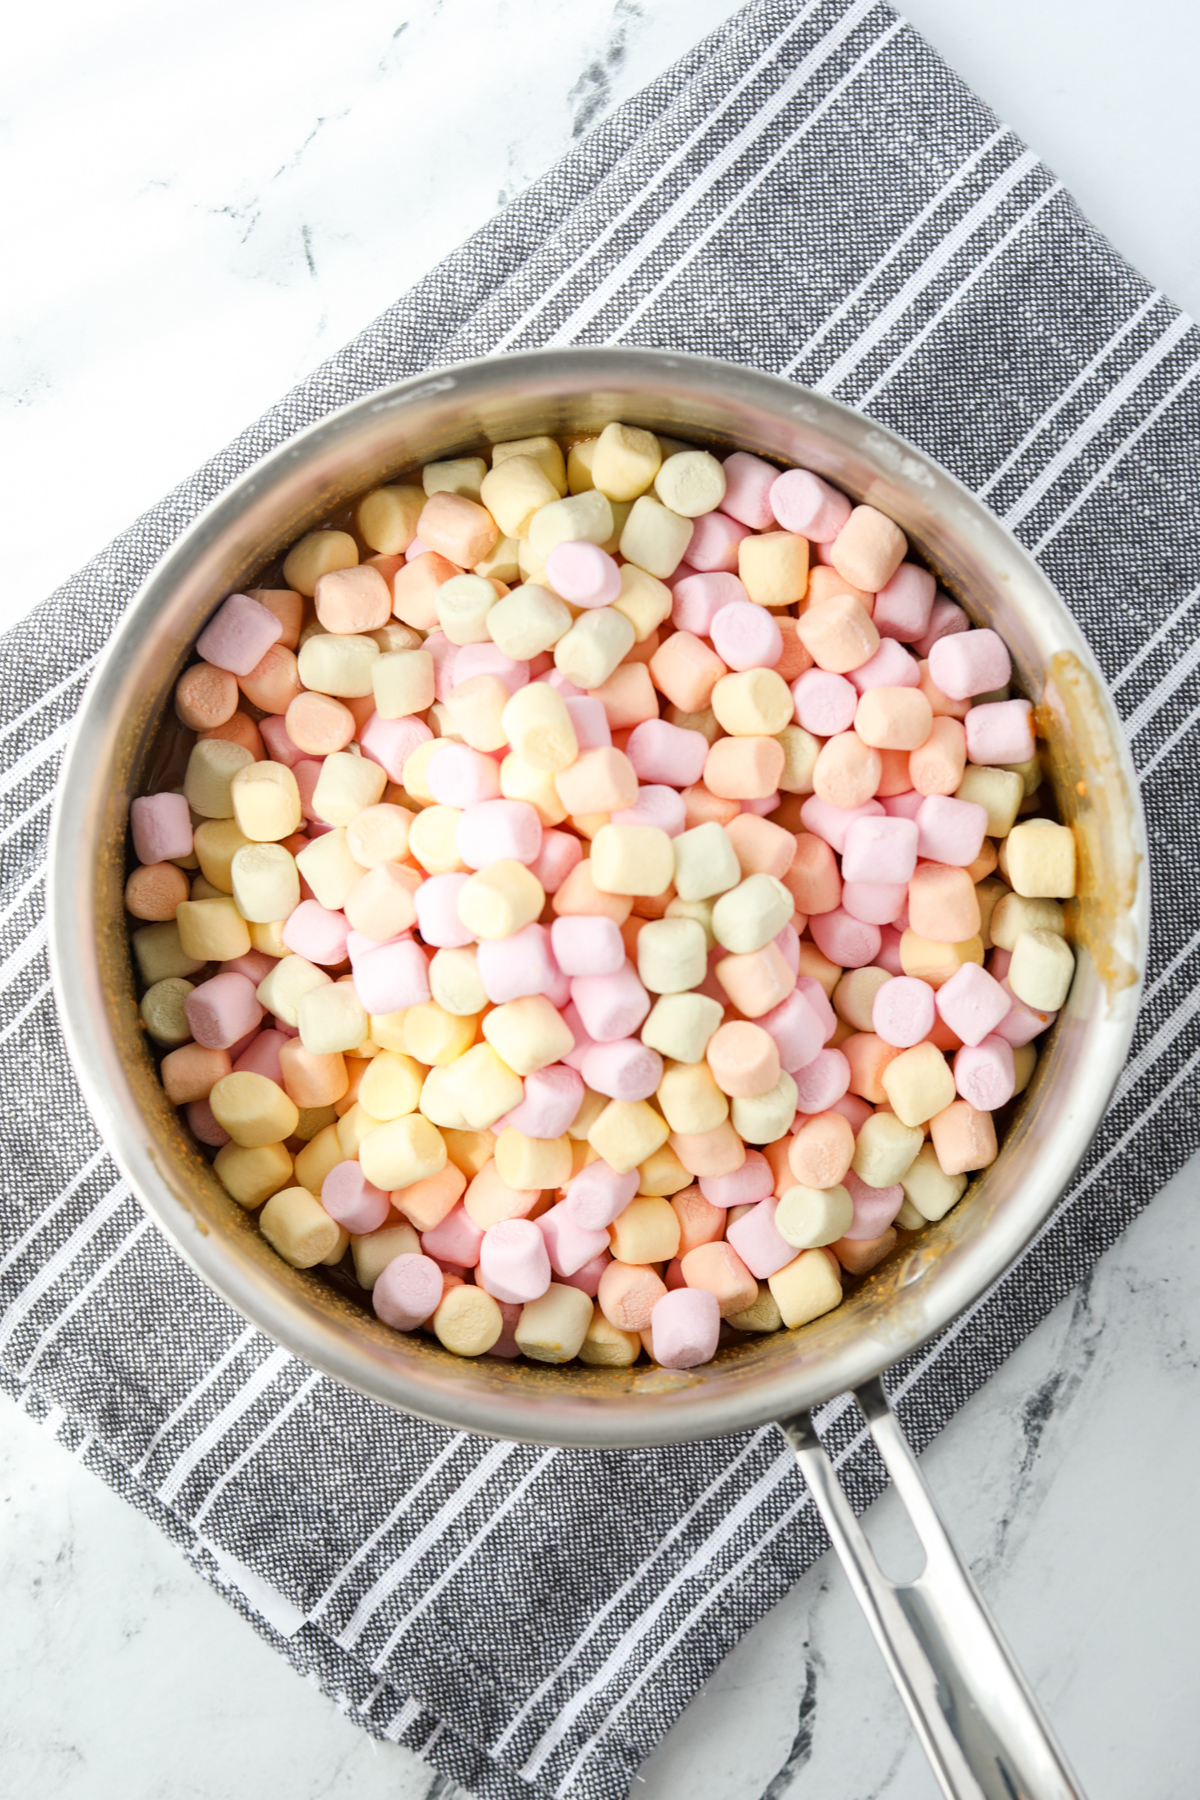 A saucepan with rainbow marshmallows in it.